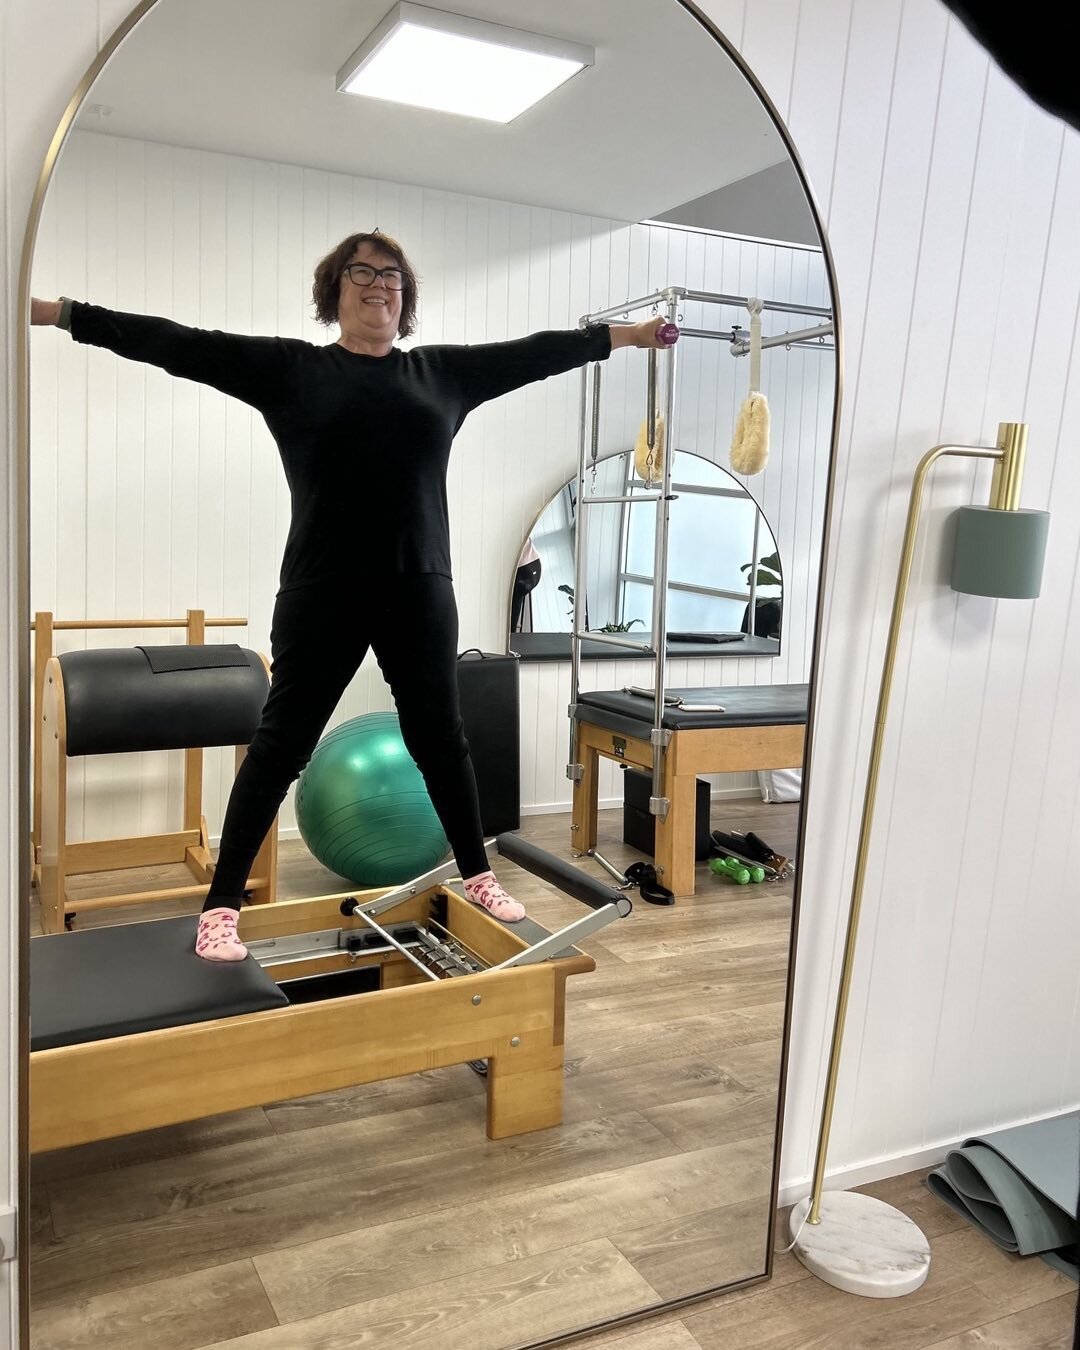 Friday afternoon fun at #clinicalpilates 
This power move leaves us feeling amazing 🤩